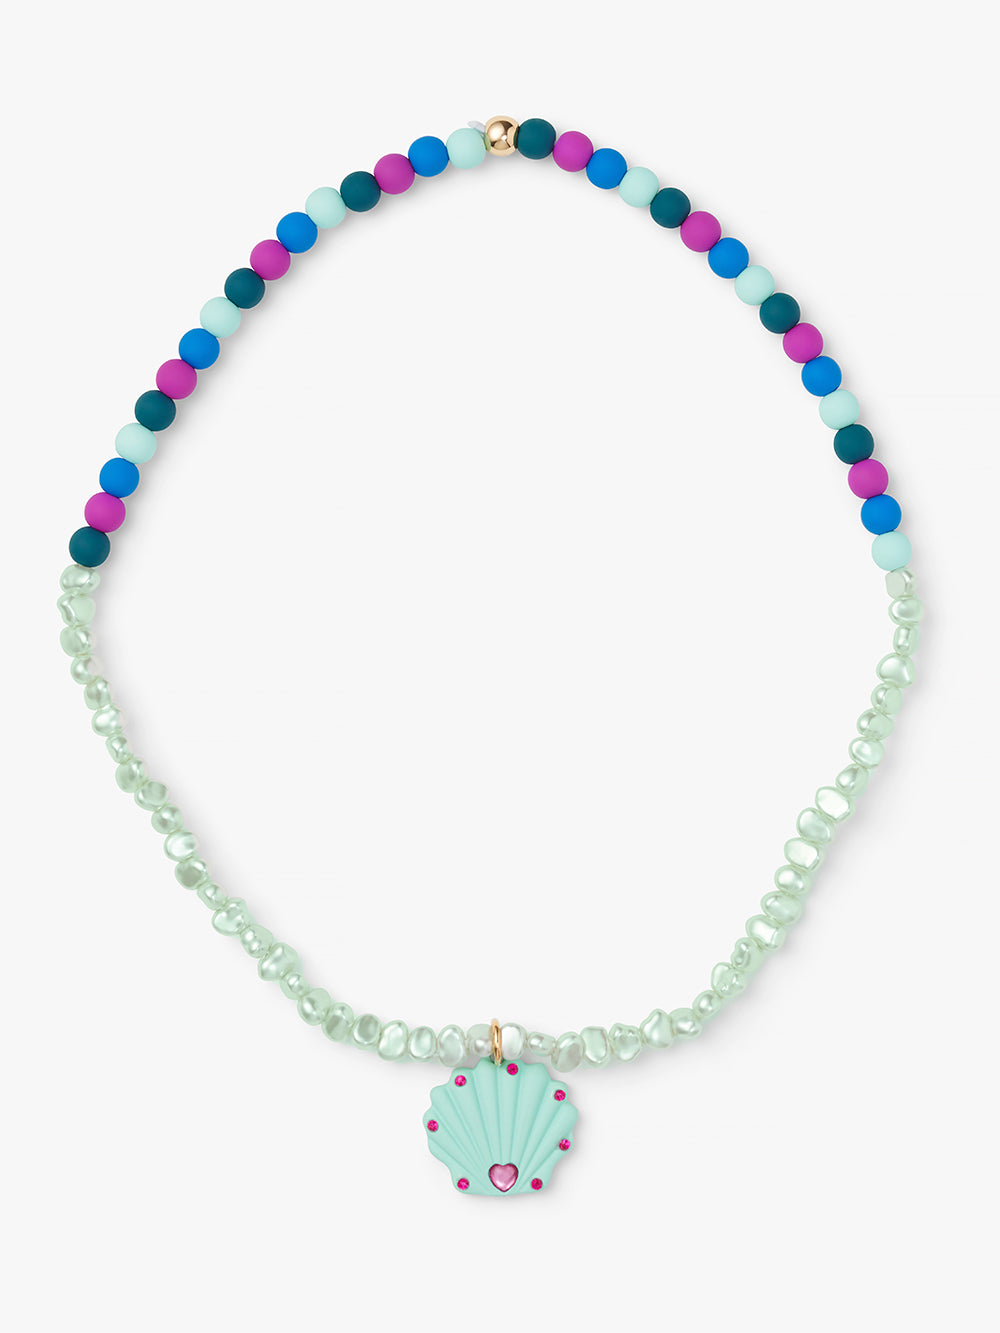 Seashell and Pearlized Bead Necklace